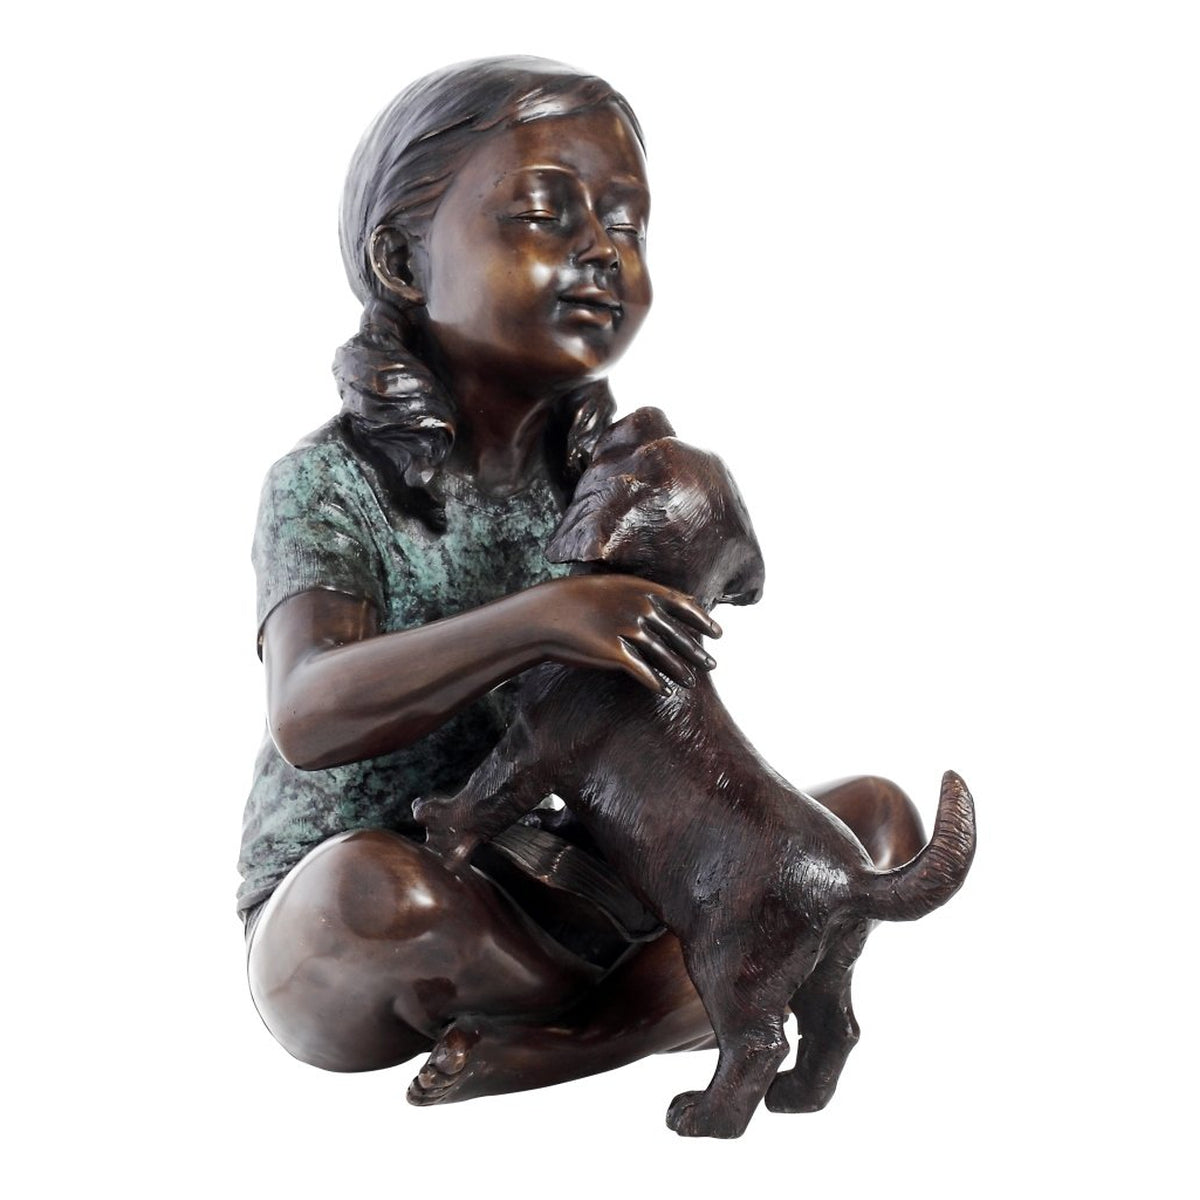 Girl and Dog Sculpture